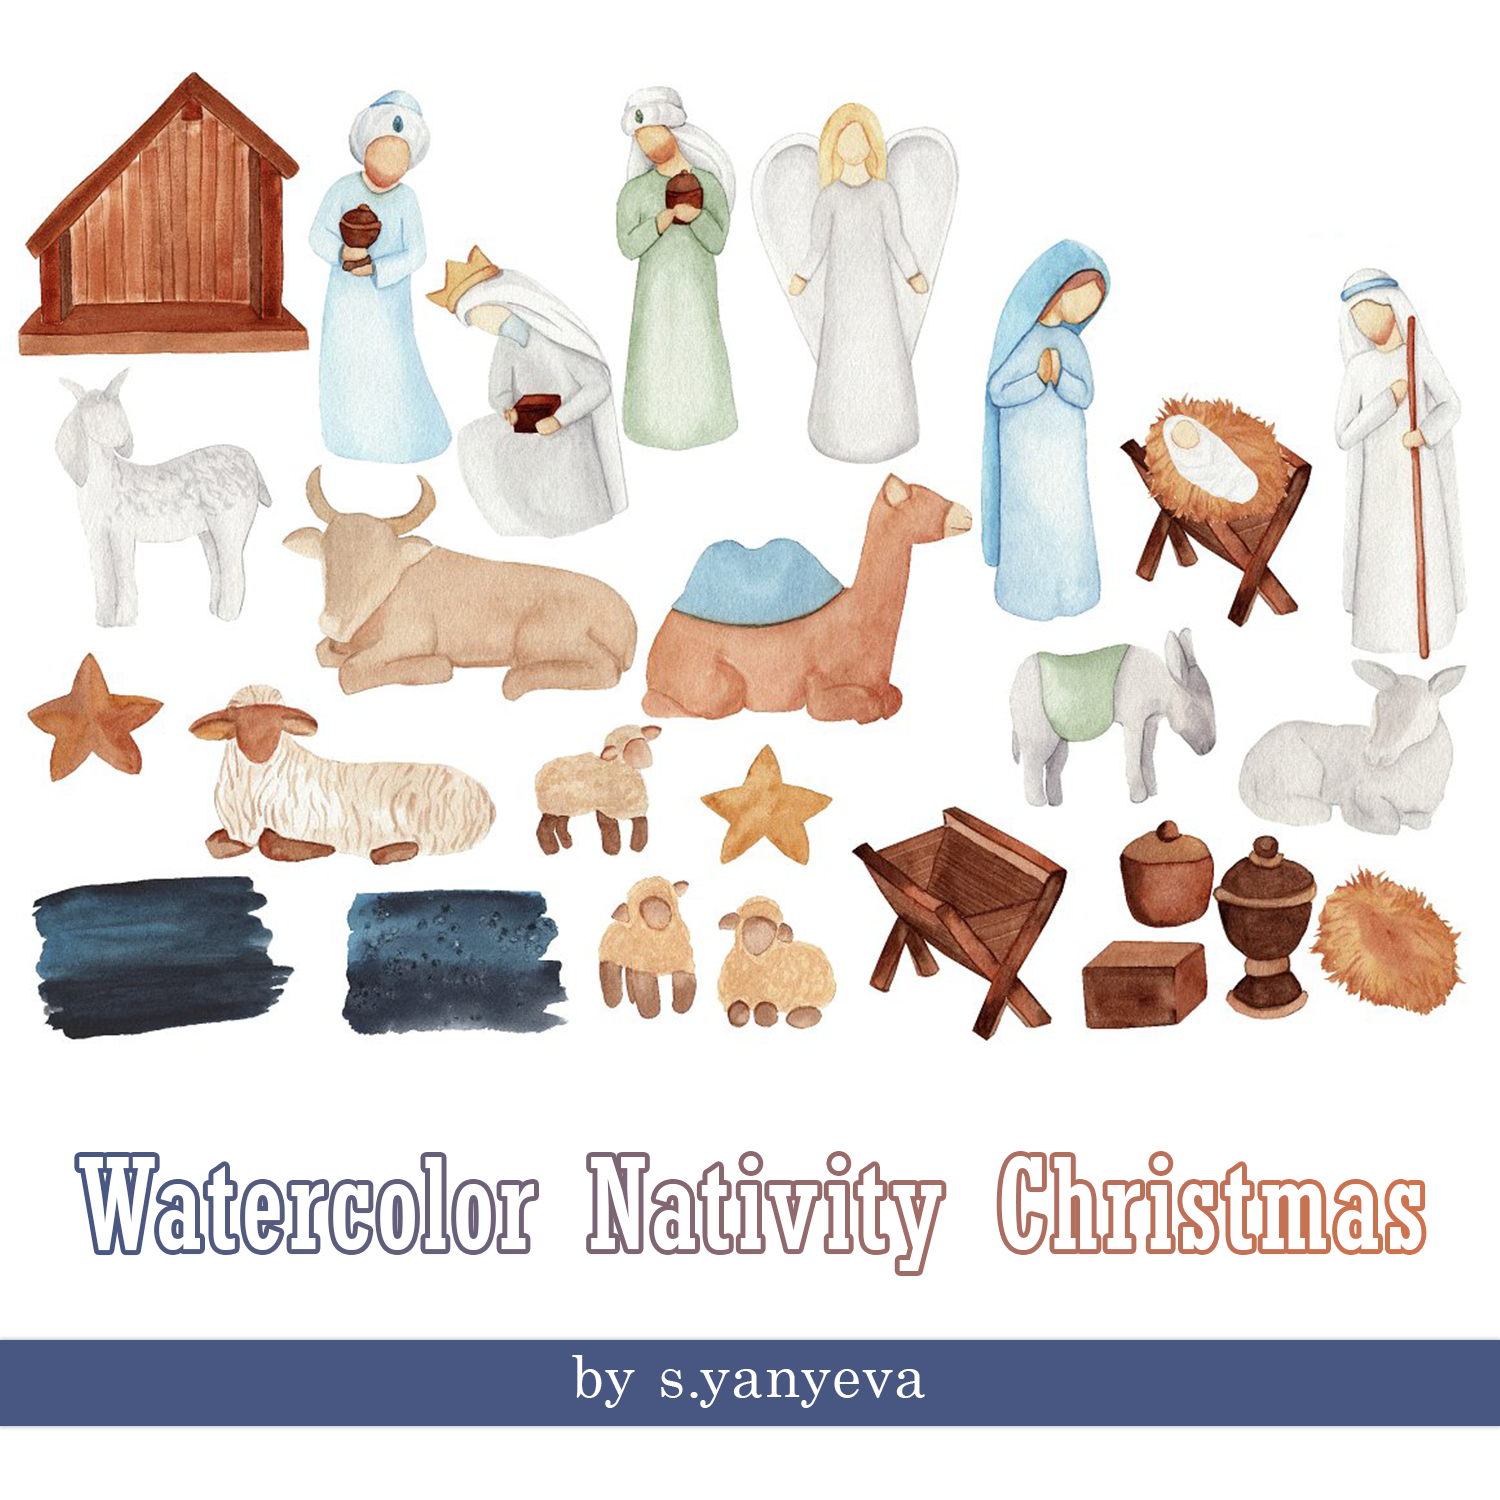 Watercolor nativity christmas preview.